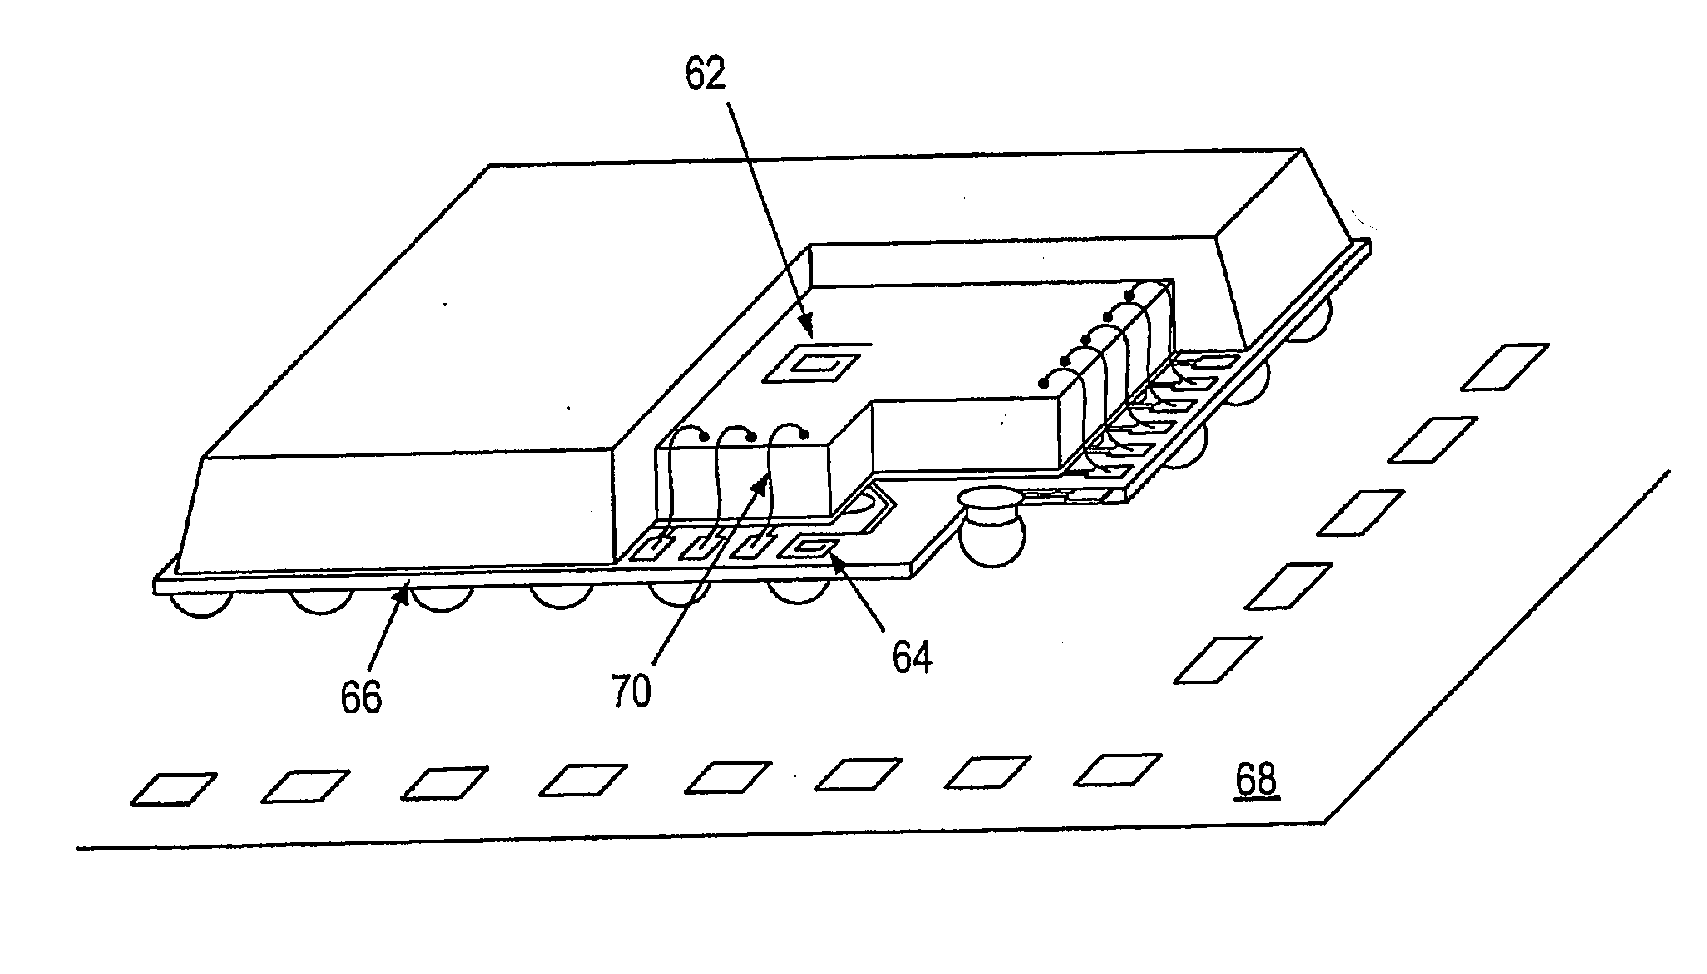 Integrated circuit incorporating wire bond inductance